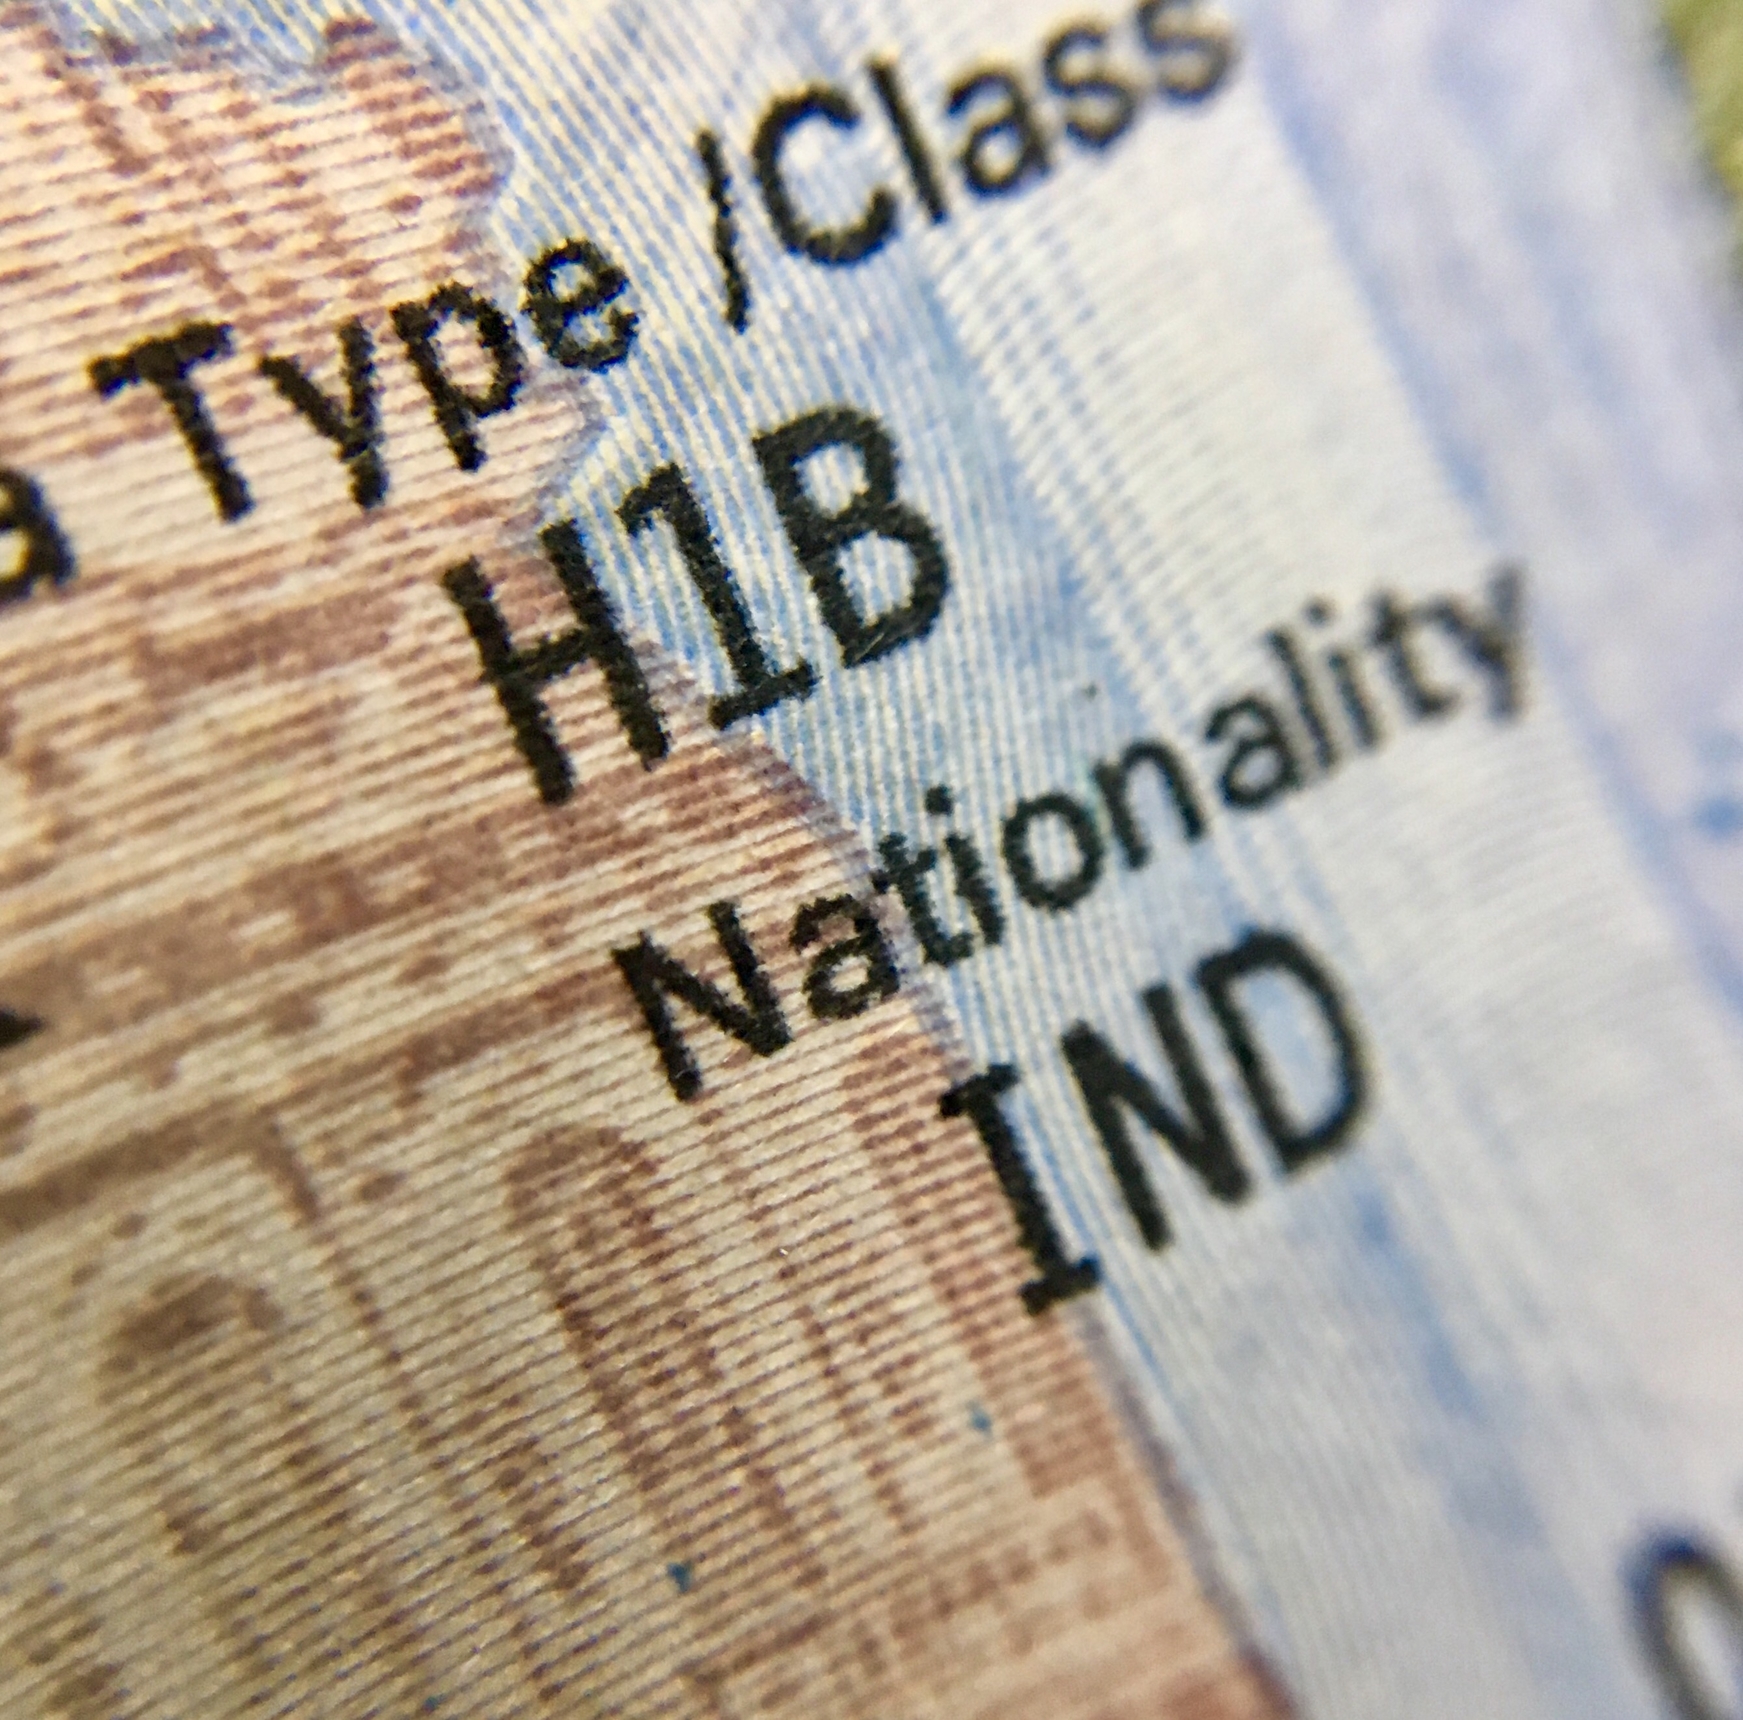 New Jersey Governor Phil Murphy Signs Law Allowing Children of H-1B Visa Workers Qualify for In-State Tuition Fees